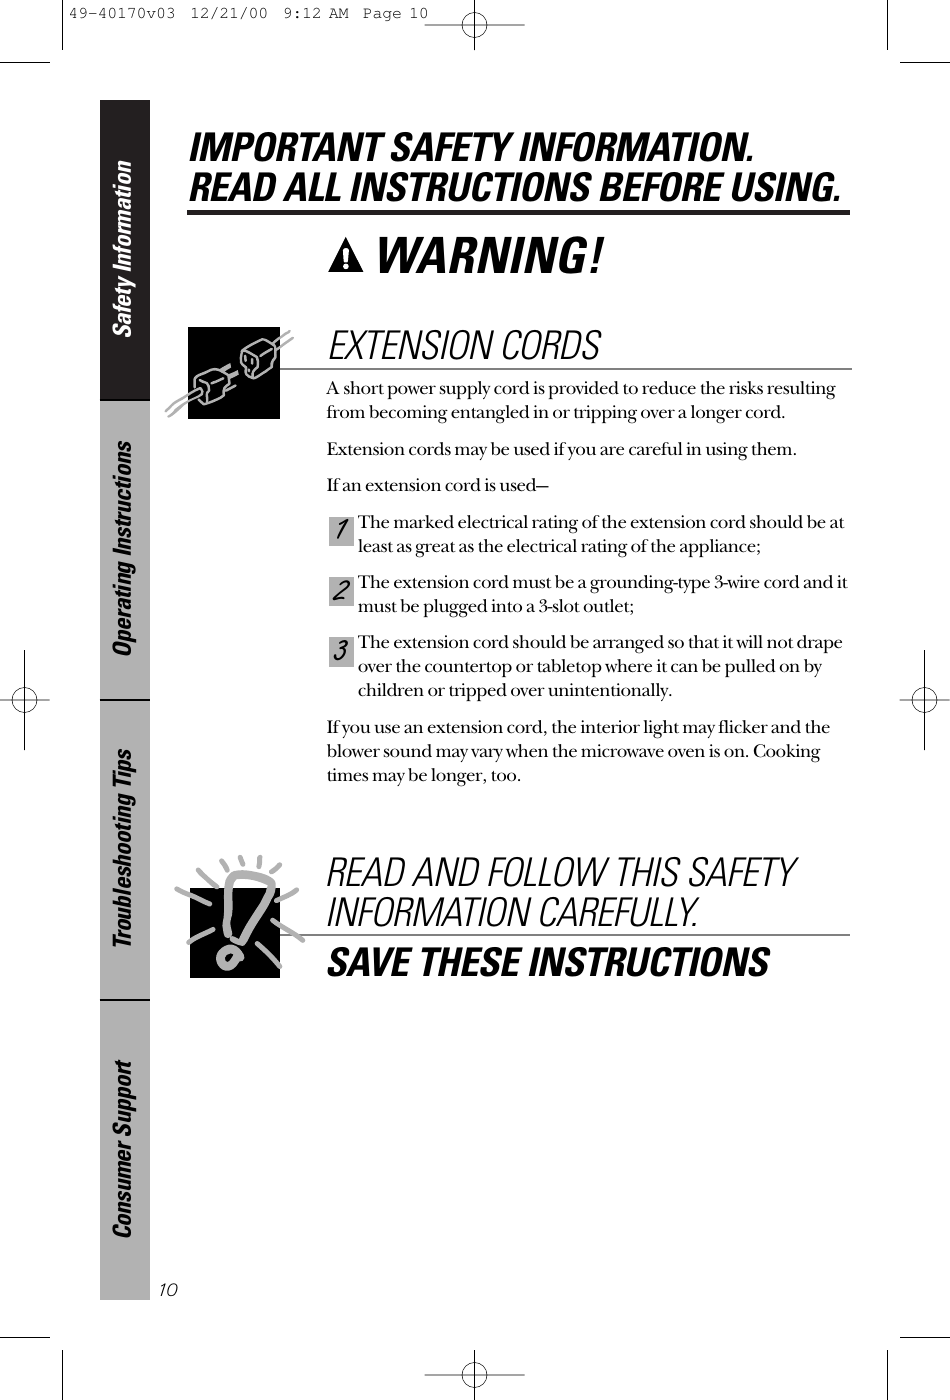 Safety InformationOperating InstructionsTroubleshooting TipsConsumer SupportIMPORTANT SAFETY INFORMATION.READ ALL INSTRUCTIONS BEFORE USING.10WARNING! A short power supply cord is provided to reduce the risks resultingfrom becoming entangled in or tripping over a longer cord.Extension cords may be used if you are careful in using them.If an extension cord is used—The marked electrical rating of the extension cord should be atleast as great as the electrical rating of the appliance;The extension cord must be a grounding-type 3-wire cord and itmust be plugged into a 3-slot outlet;The extension cord should be arranged so that it will not drapeover the countertop or tabletop where it can be pulled on bychildren or tripped over unintentionally.If you use an extension cord, the interior light may flicker and theblower sound may vary when the microwave oven is on. Cookingtimes may be longer, too.321EXTENSION CORDSREAD AND FOLLOW THIS SAFETYINFORMATION CAREFULLY.SAVE THESE INSTRUCTIONS49-40170v03  12/21/00  9:12 AM  Page 10